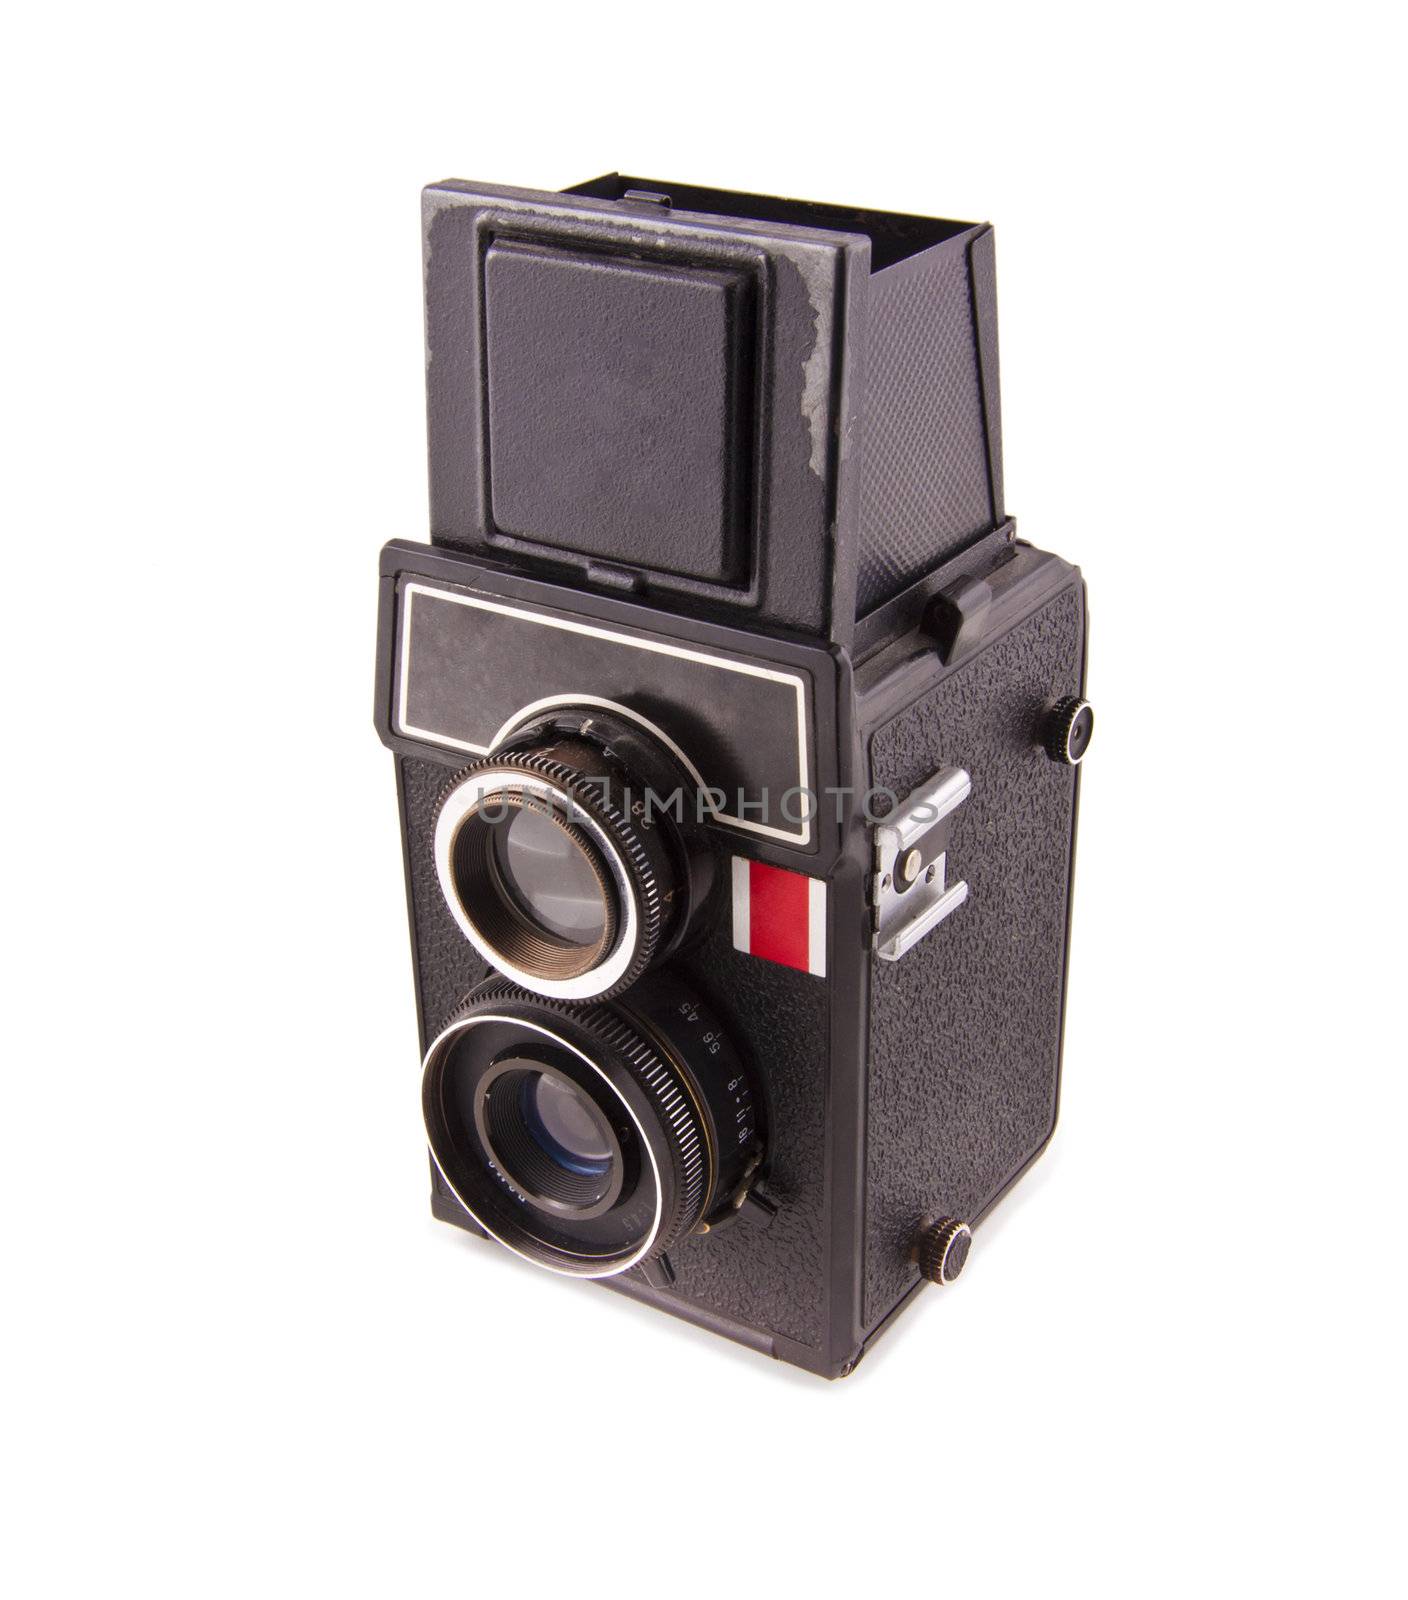 Twin lens reflex old photo camera isolated on white